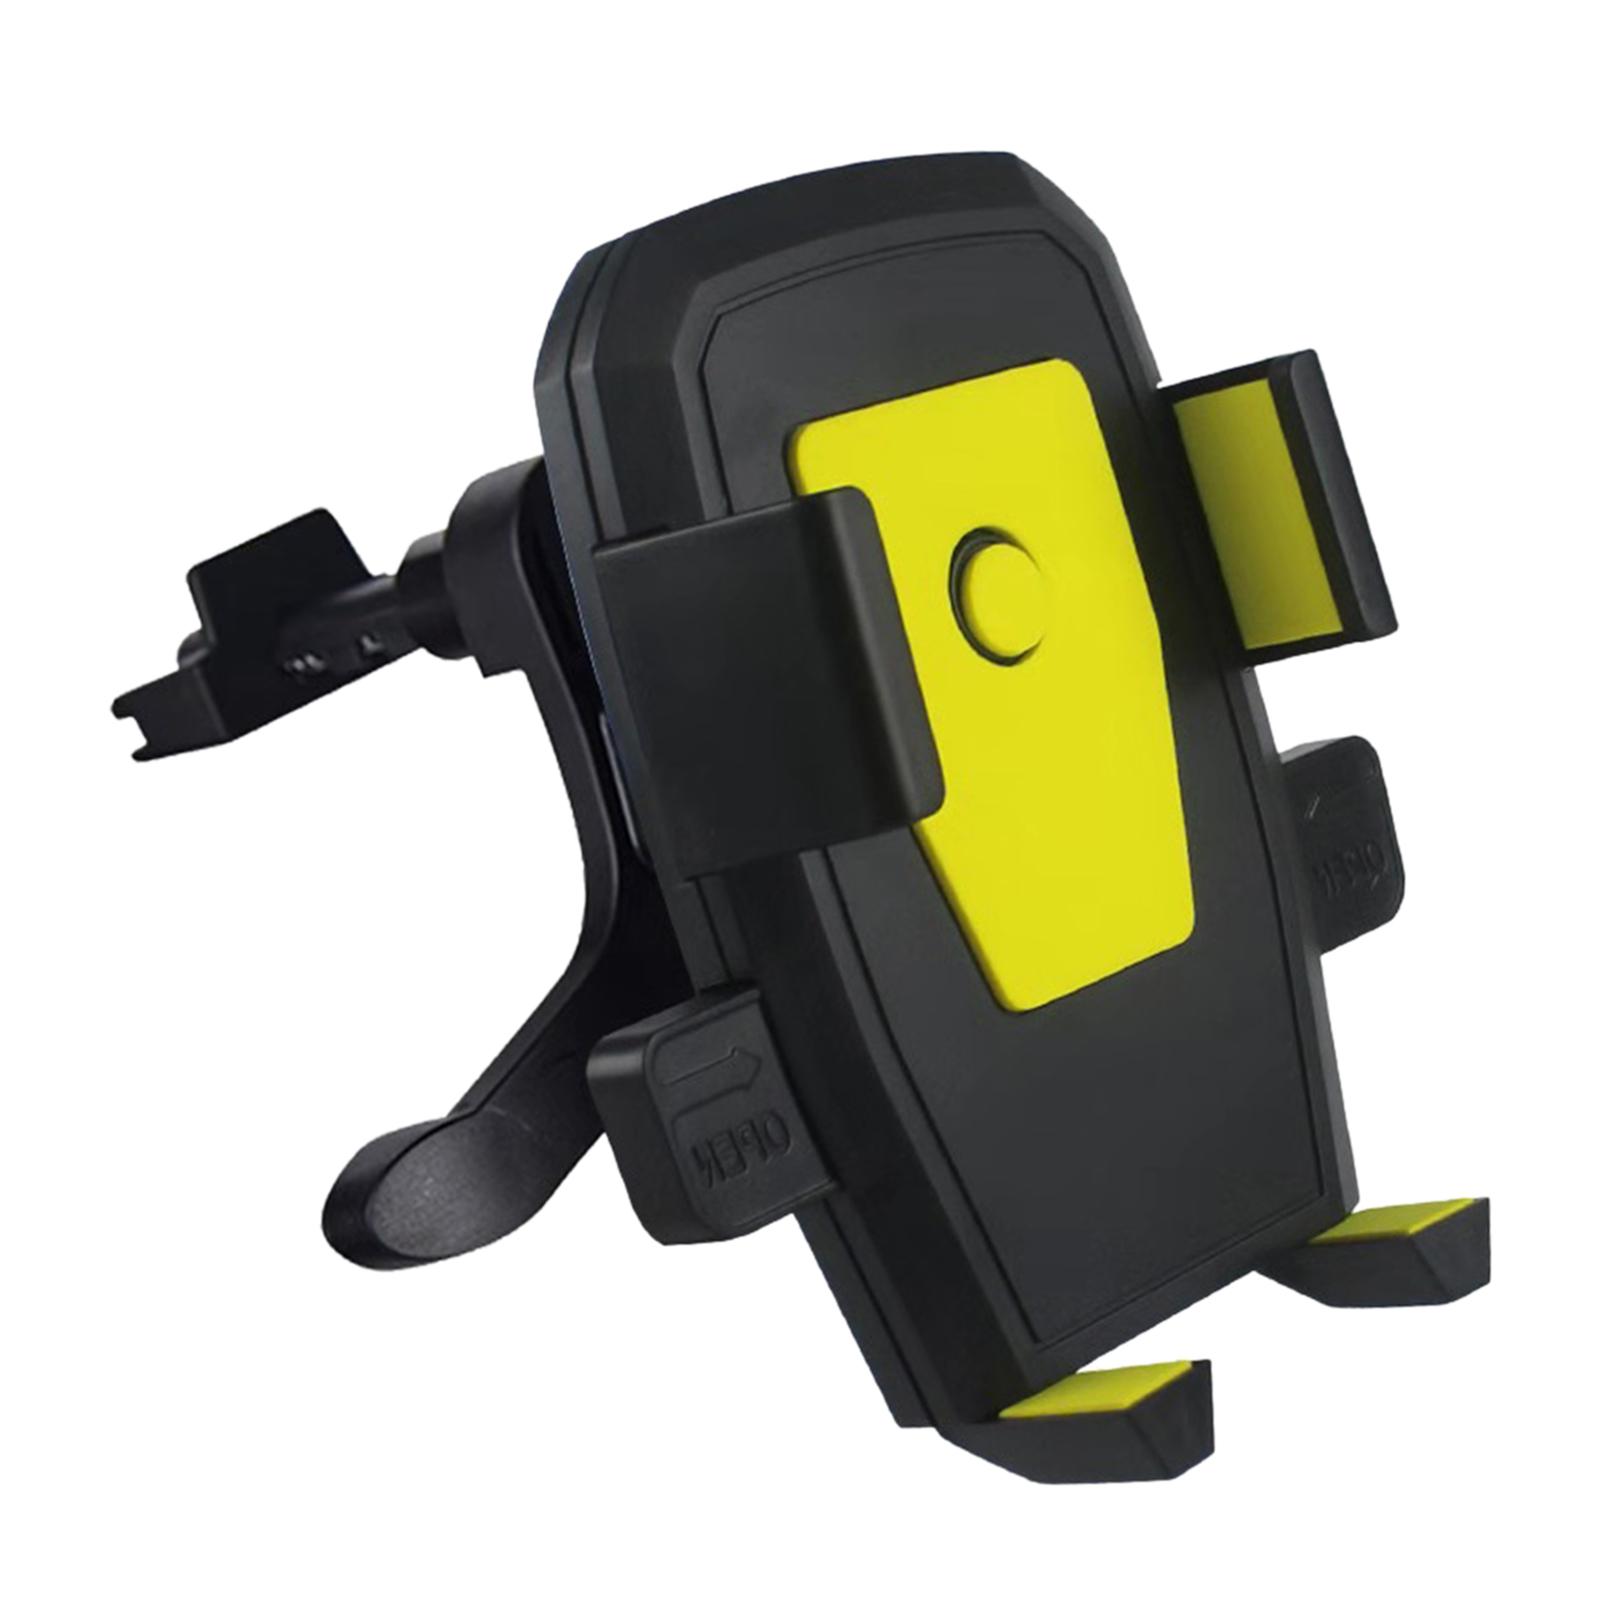 Vent Phone Holder for Car Durable Multiple Viewing Angle Adjustable Yellow